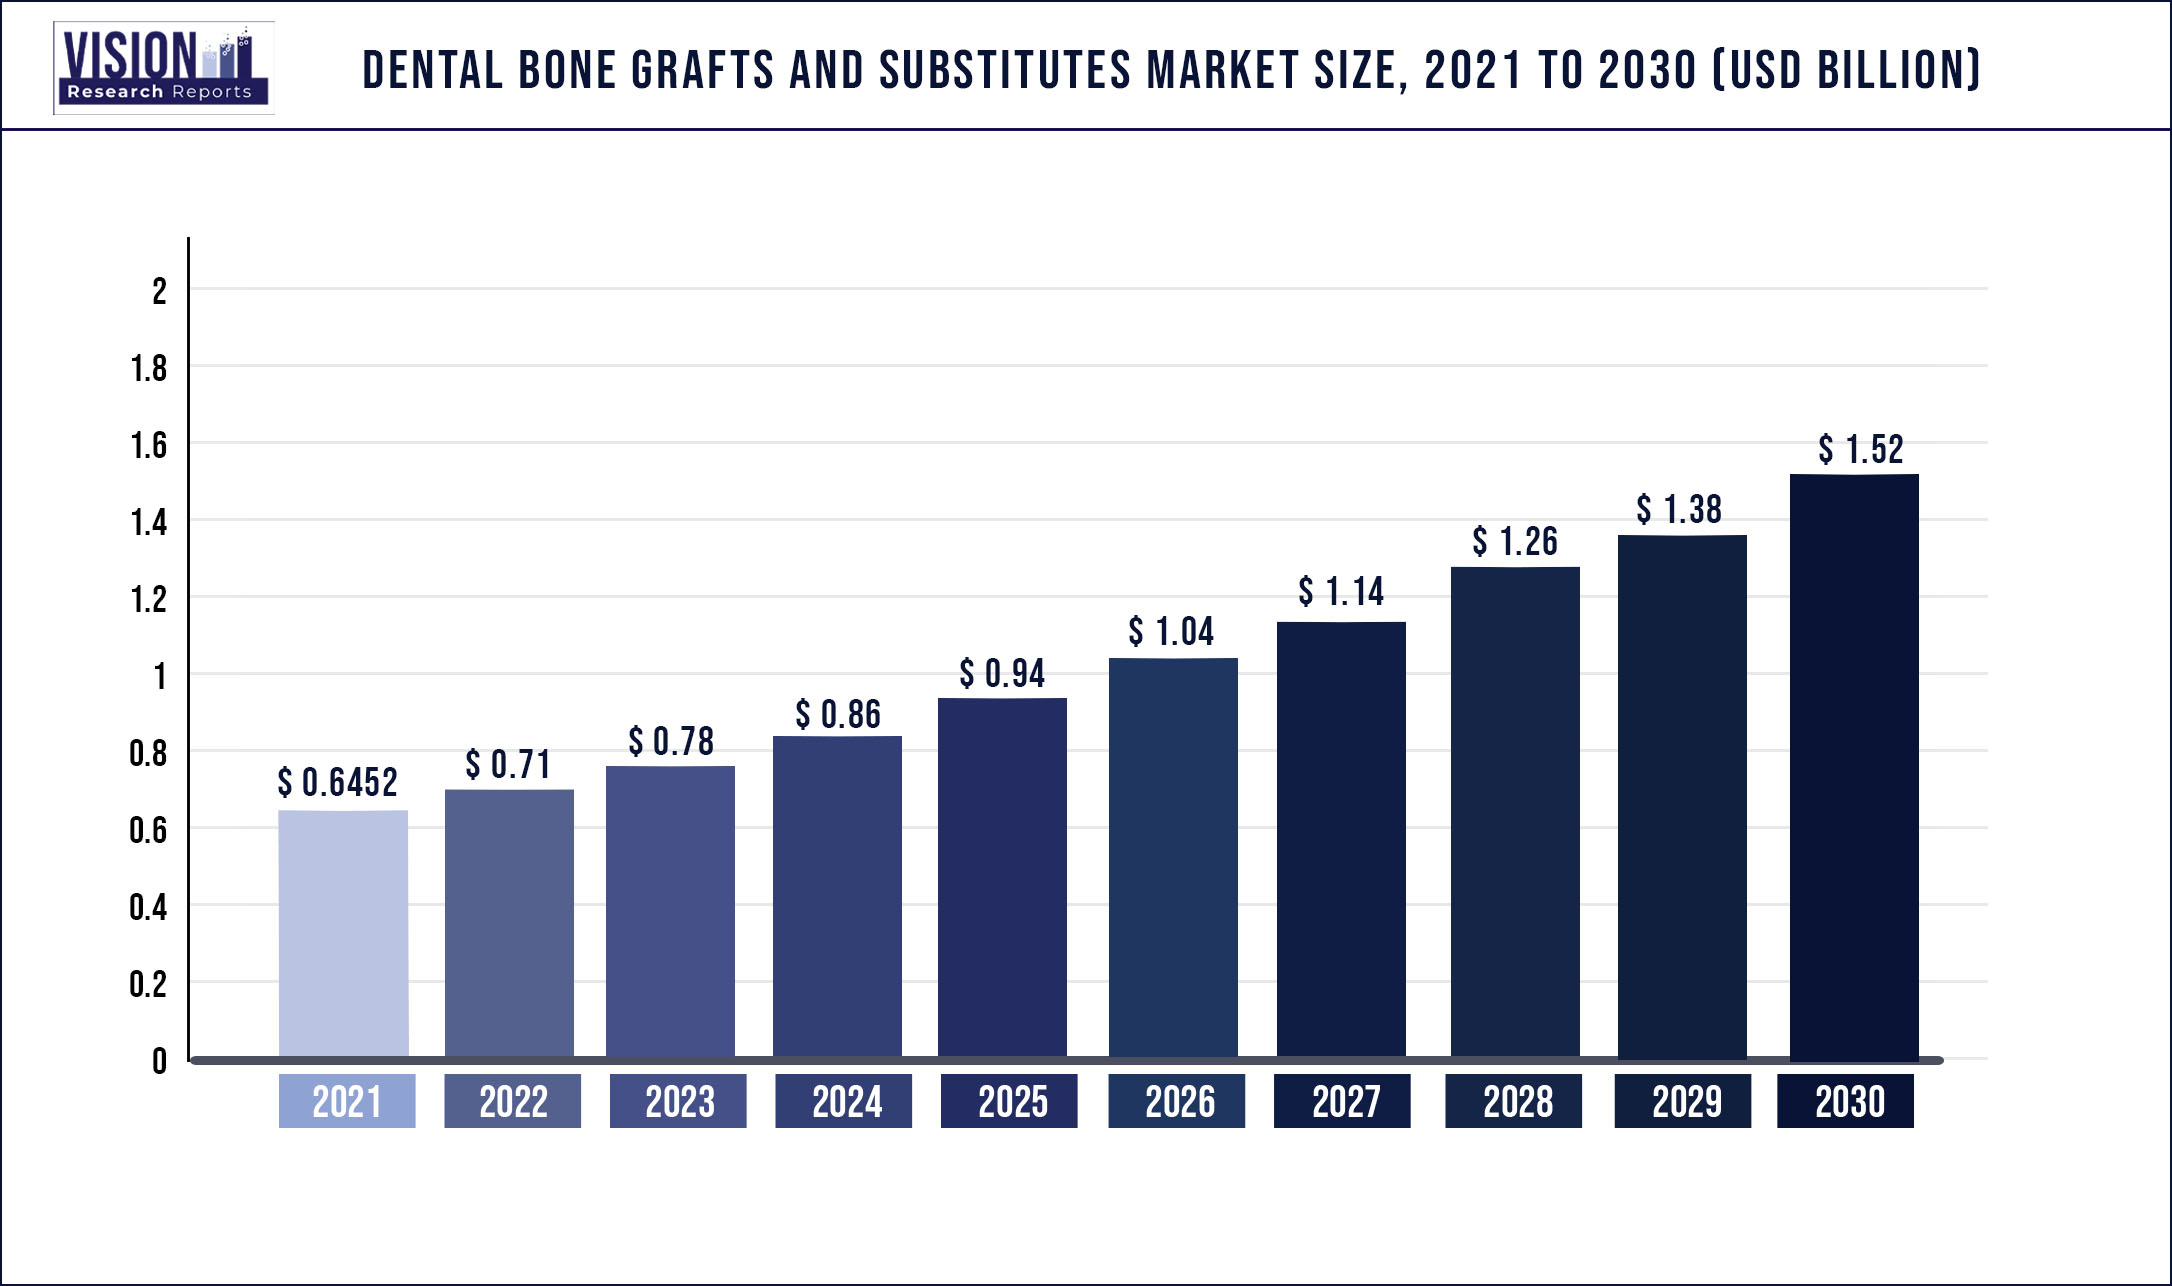 Dental Bone Grafts And Substitutes Market Size 2021 to 2030